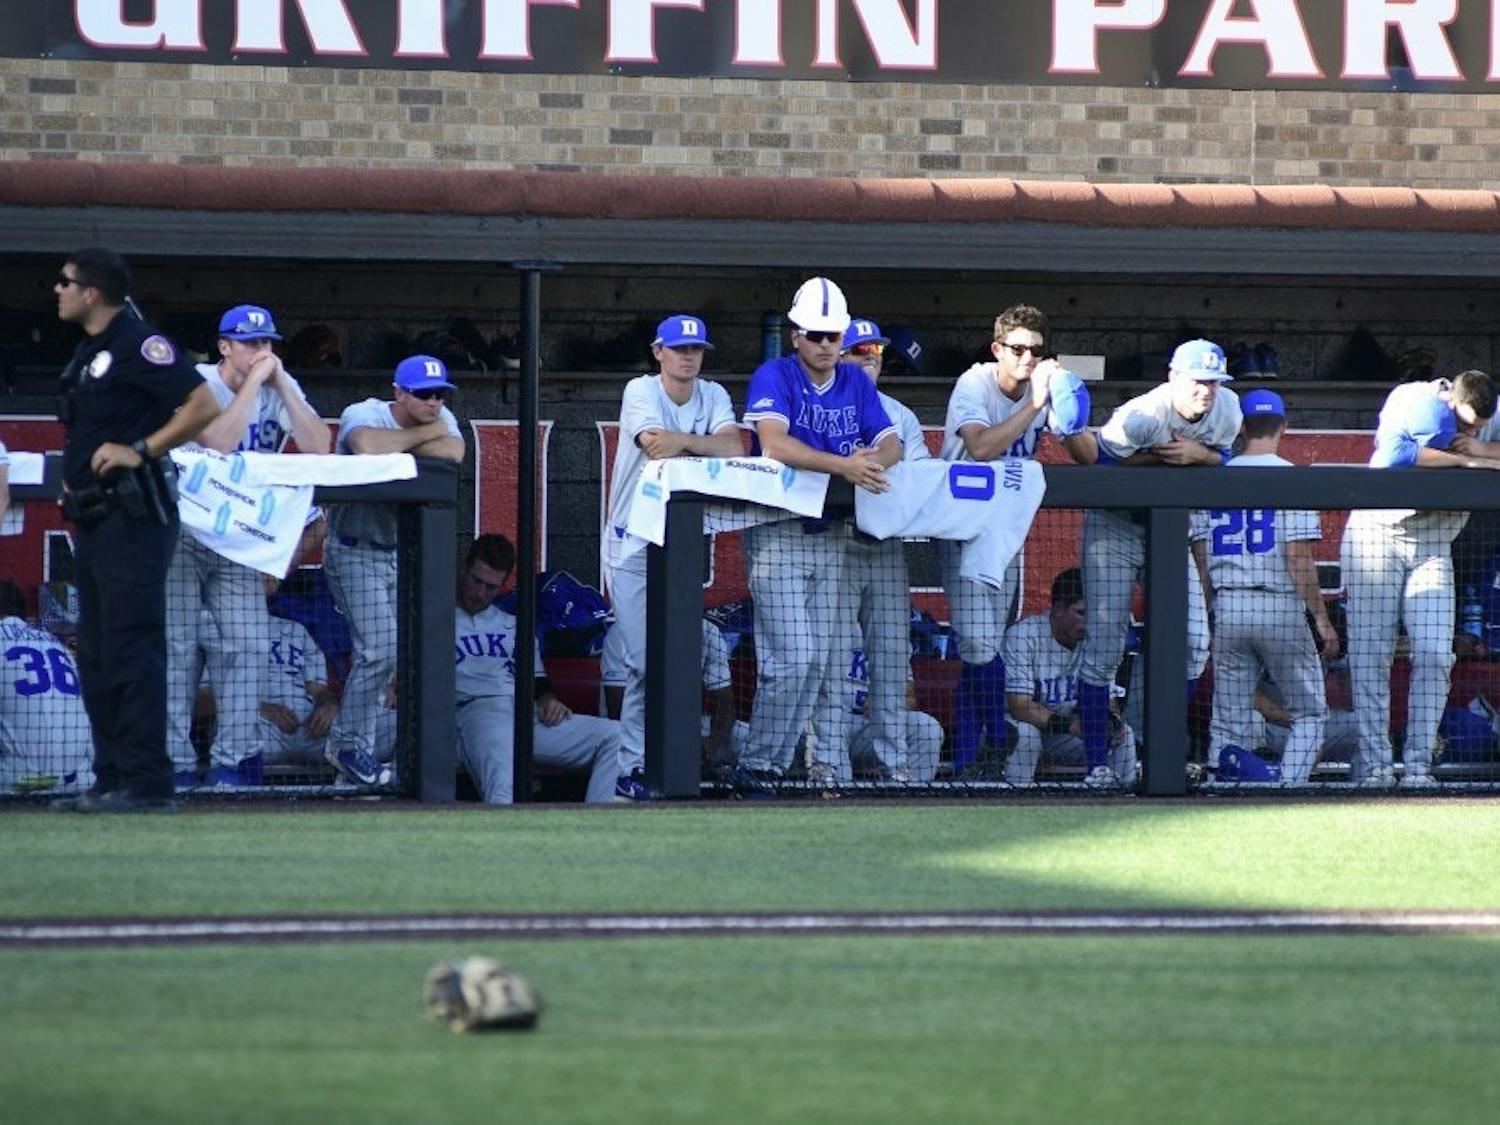 The Blue Devils' 6-2 loss to Texas Tech in the deciding game of the super regional kept Duke out of last year's College World Series.